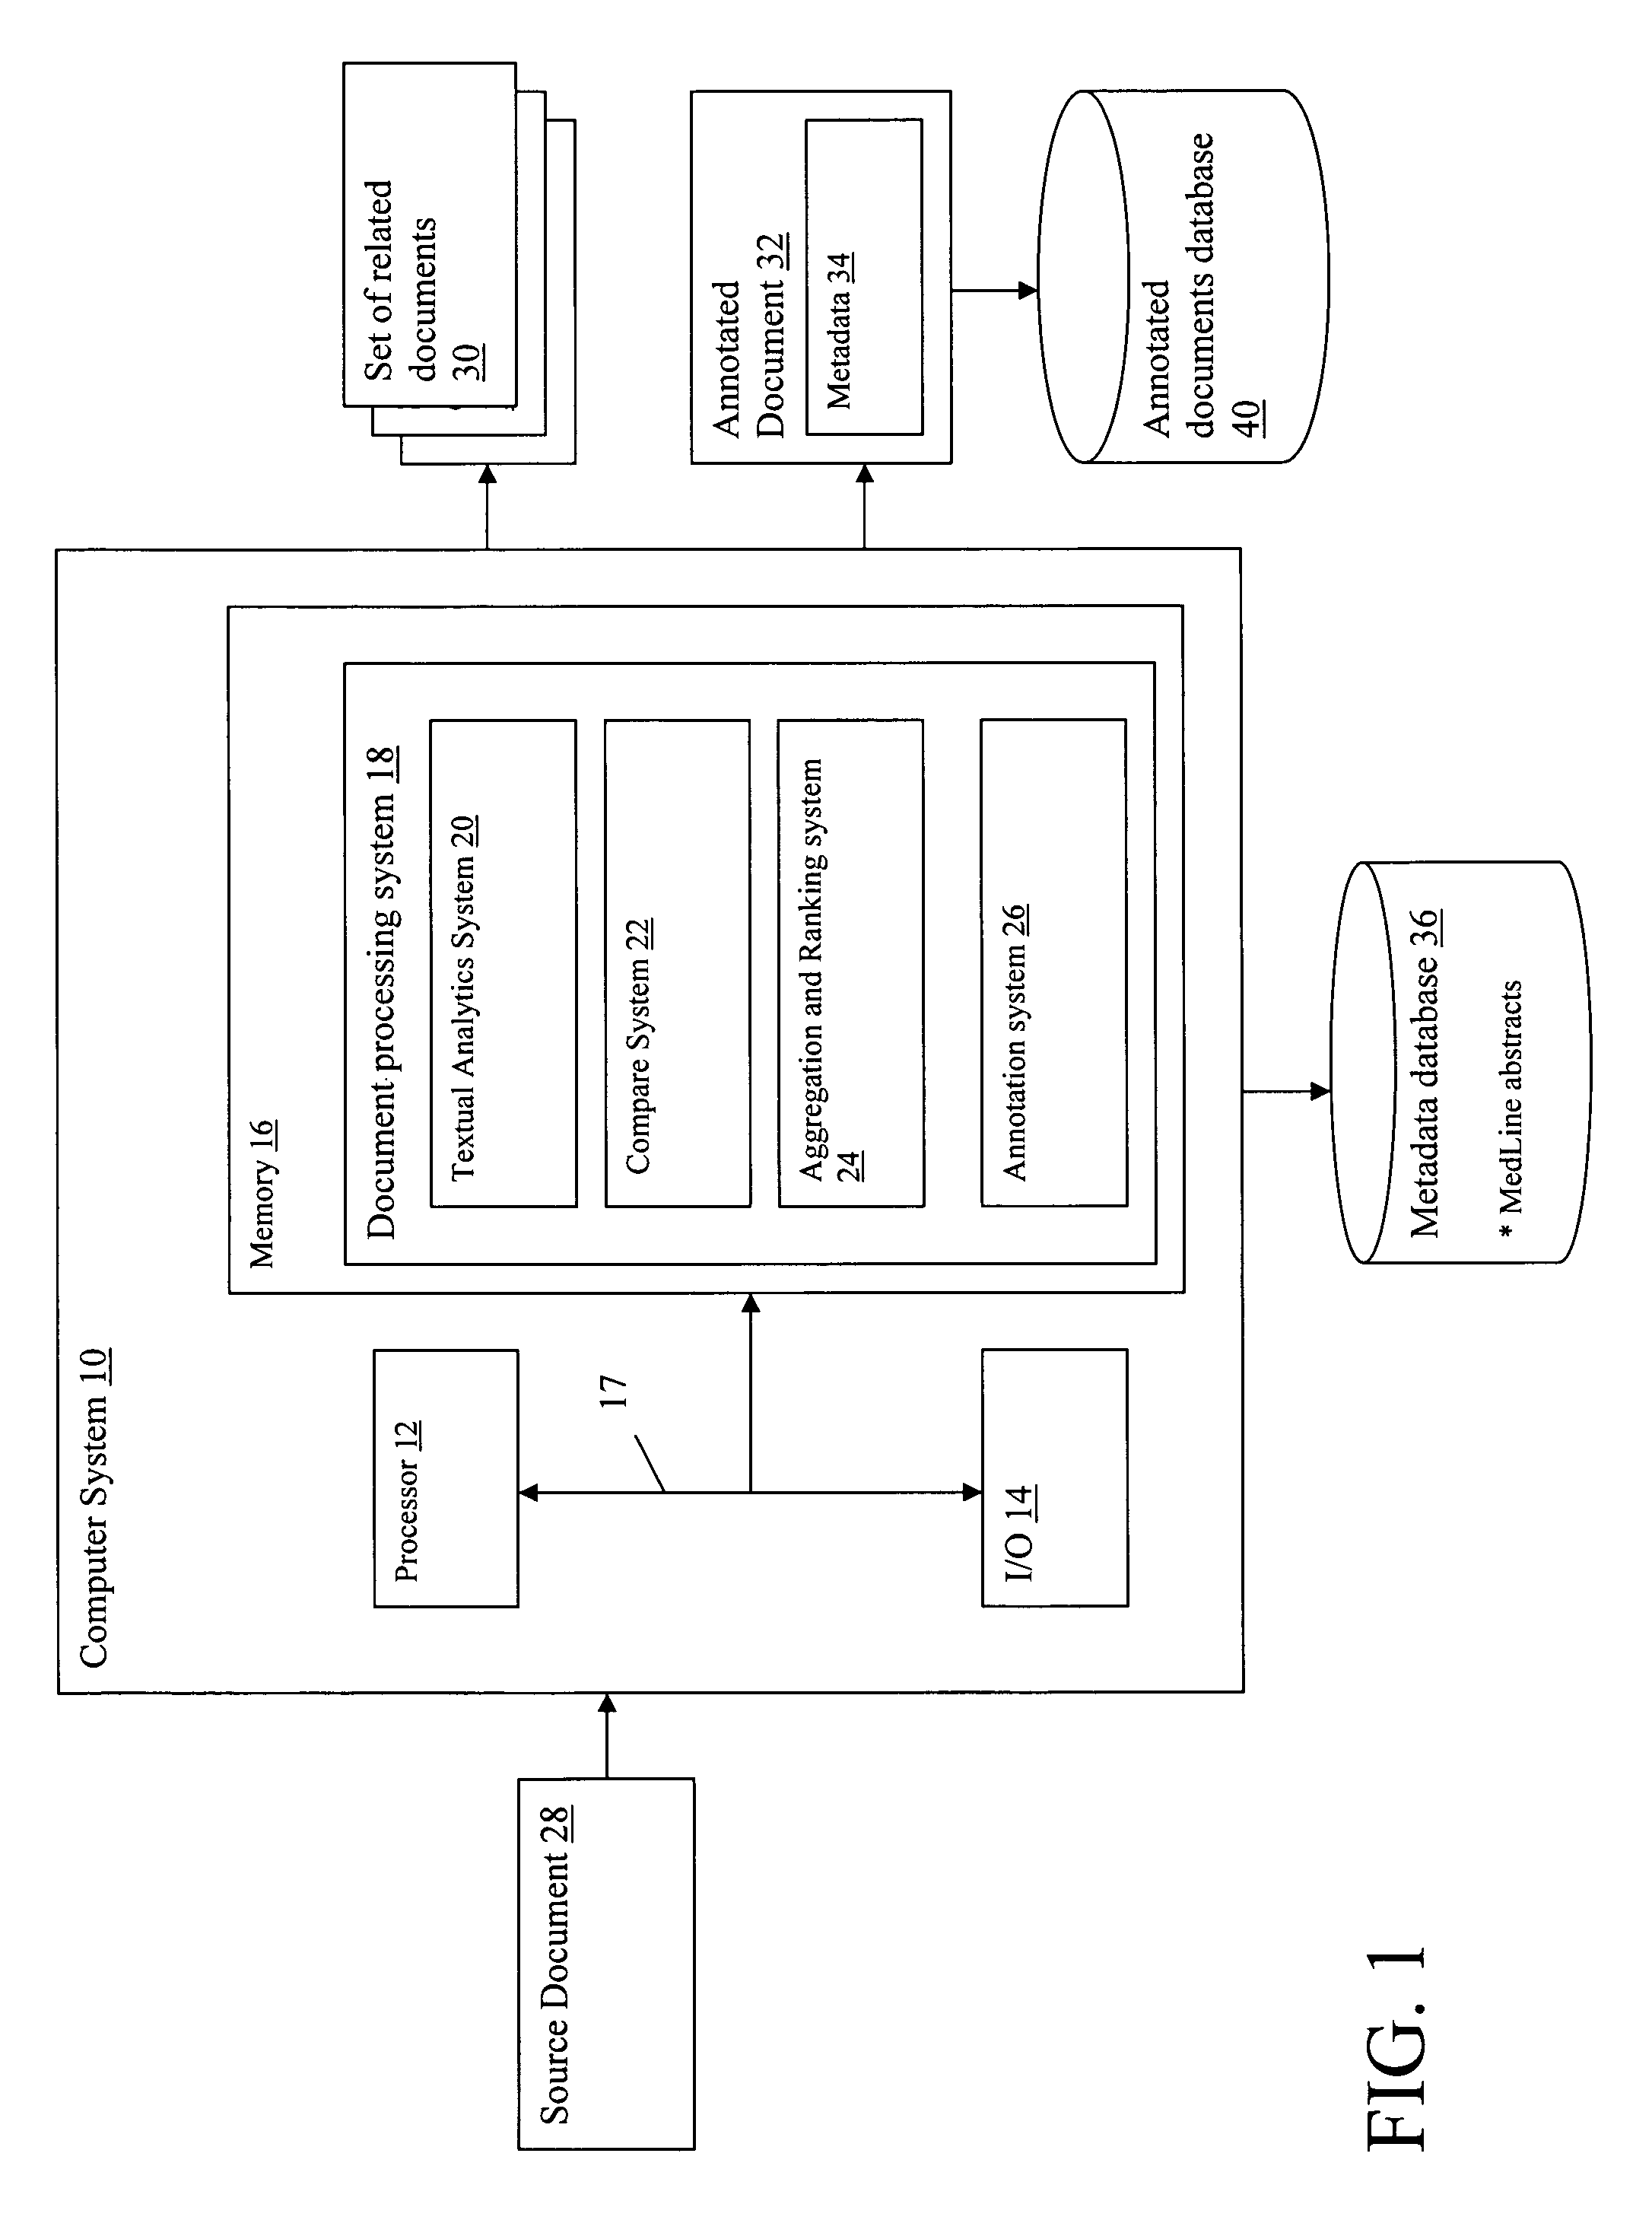 System and method for using text analytics to identify a set of related documents from a source document